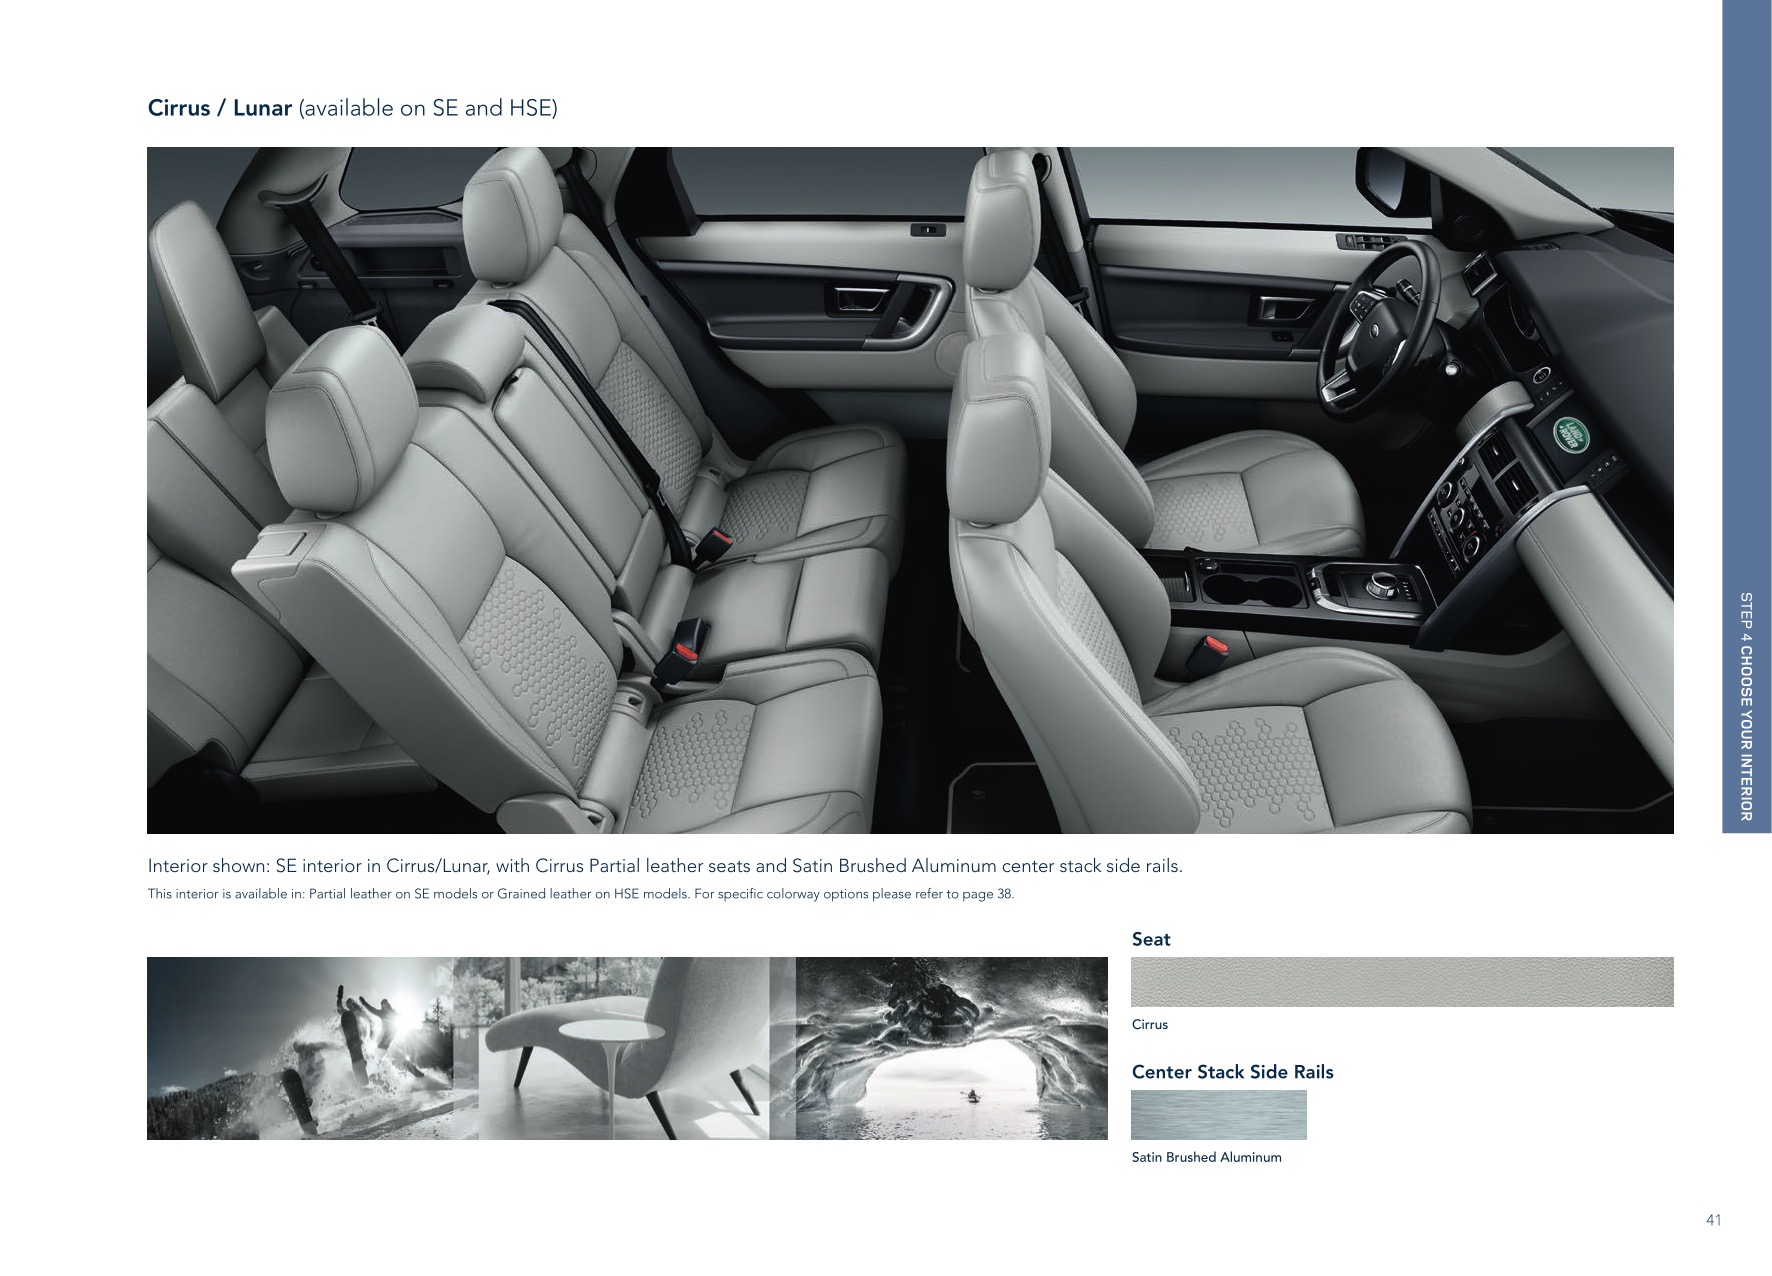 2015 Land Rover Discovery Sport Brochure Page 40